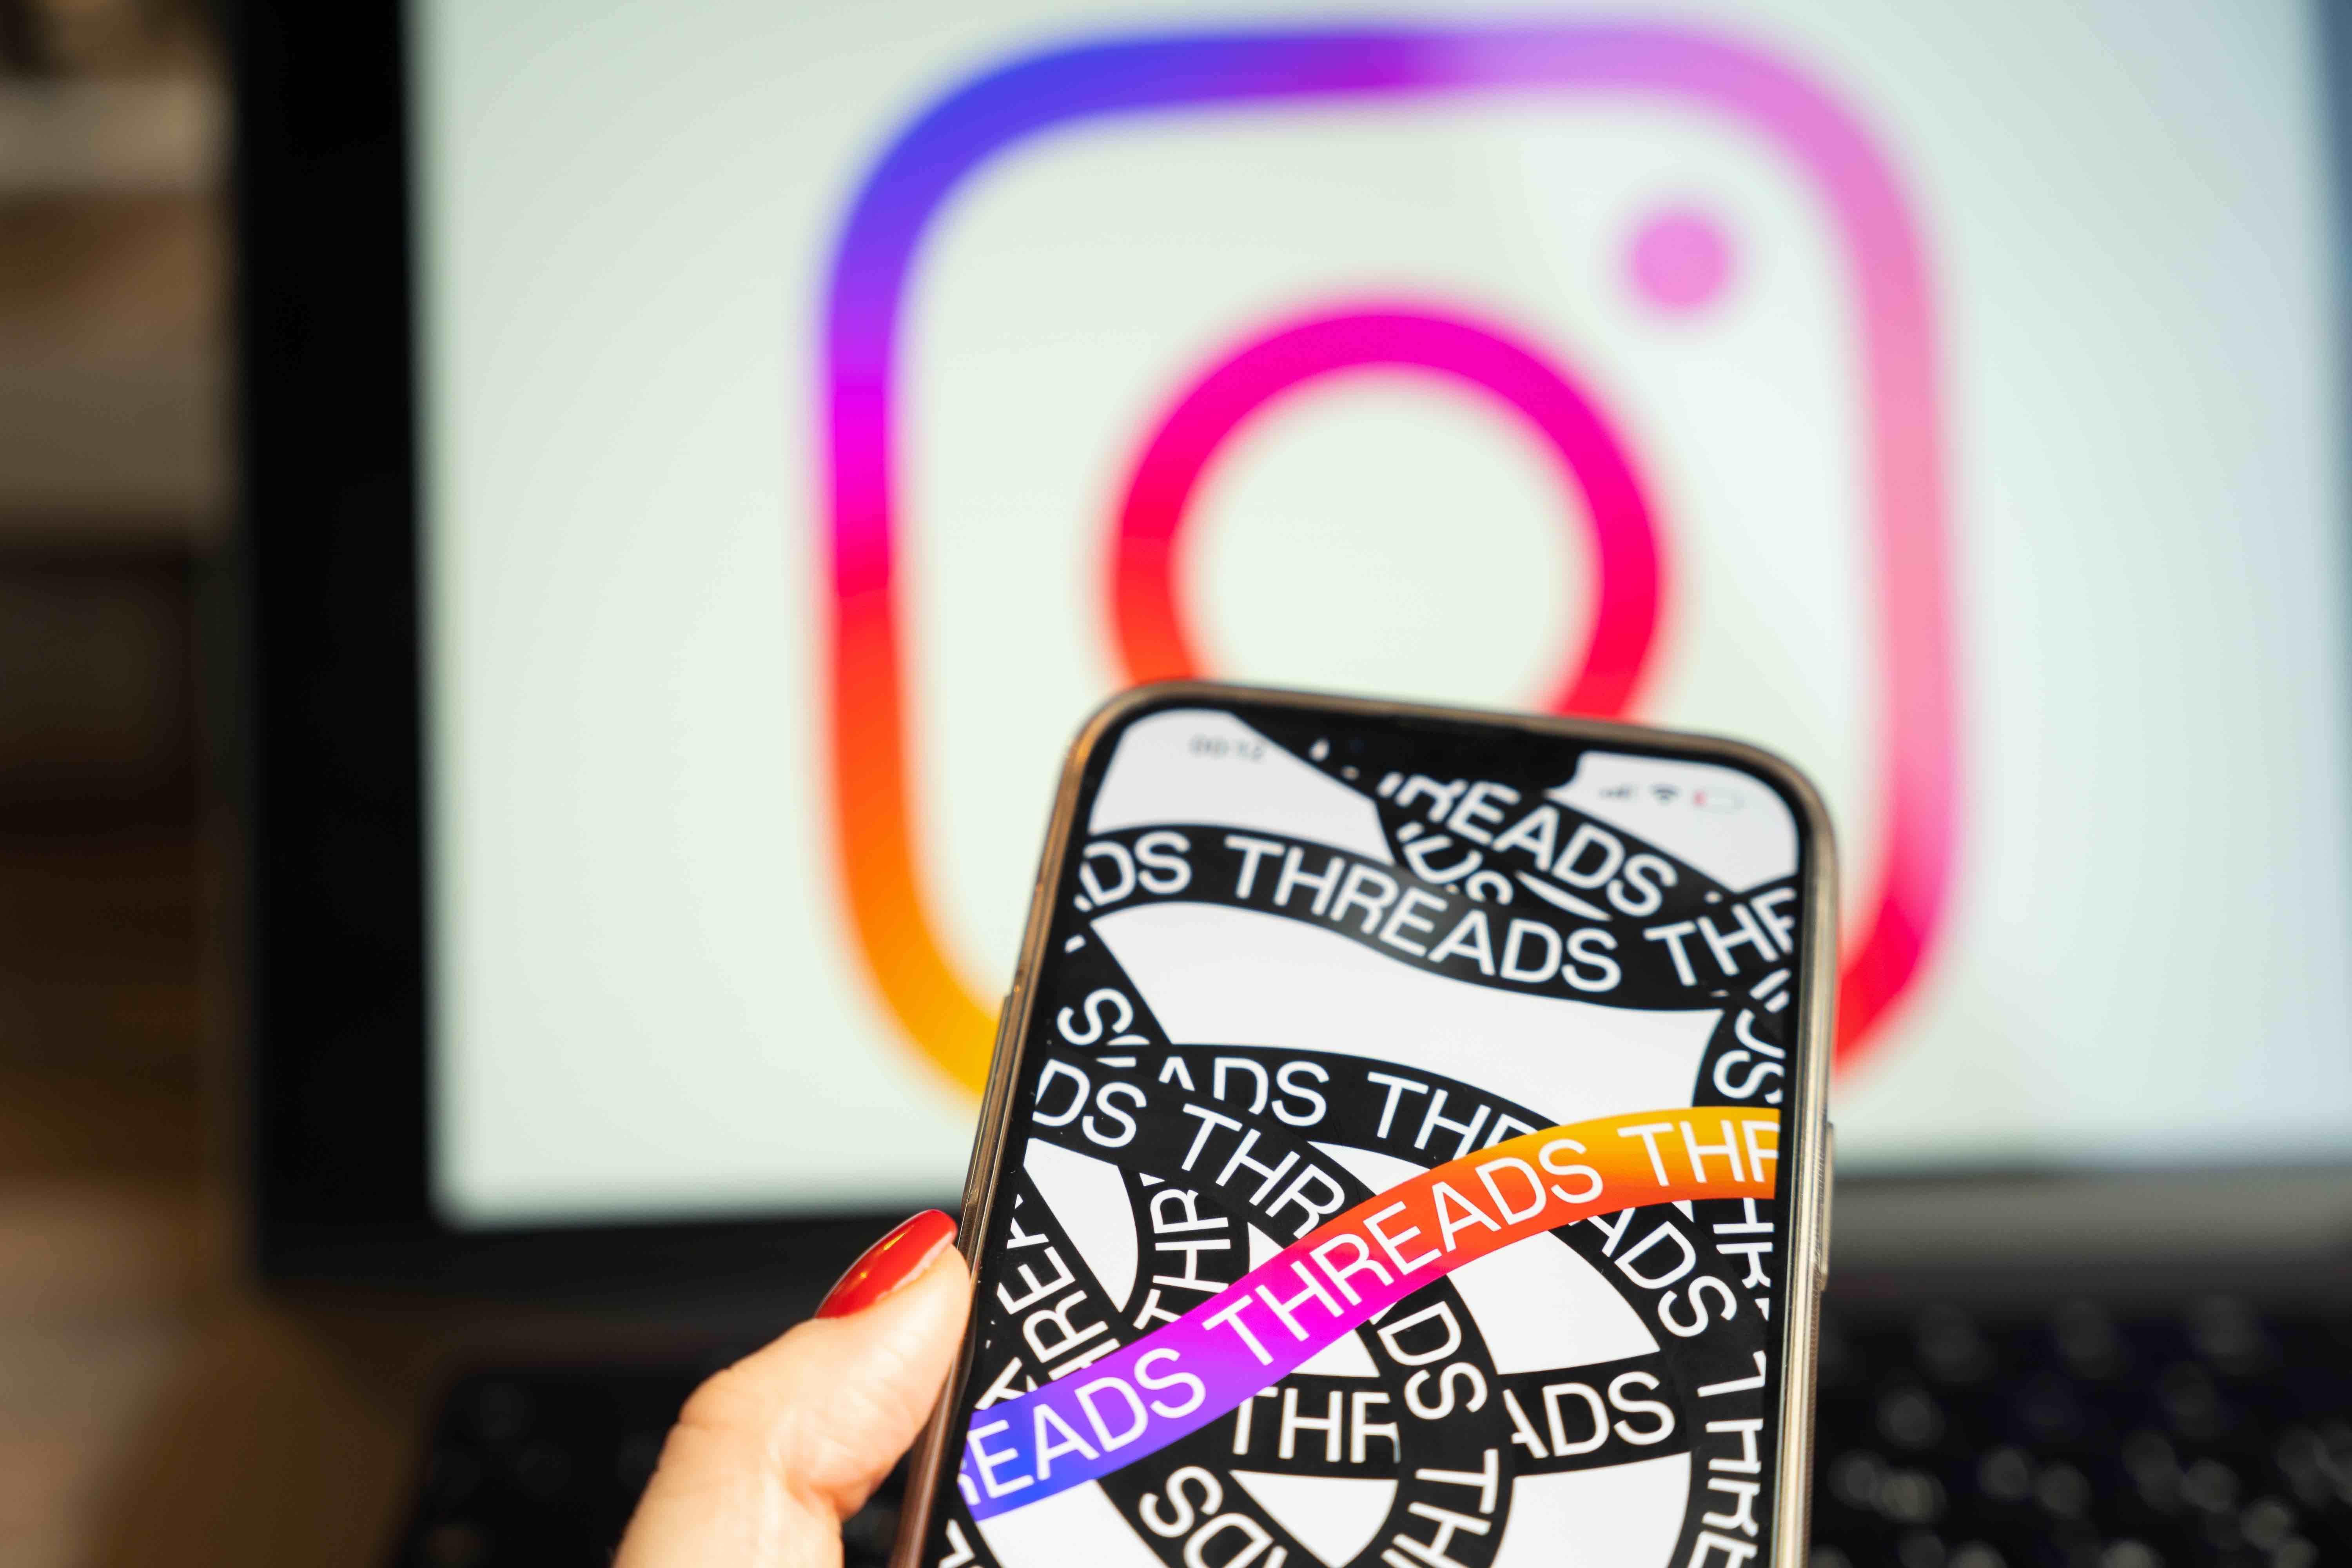 A manicured hand holds a smartphone featuring the Threads app. Behind the phone is a blurry image of the purple and orange Instagram logo. 
